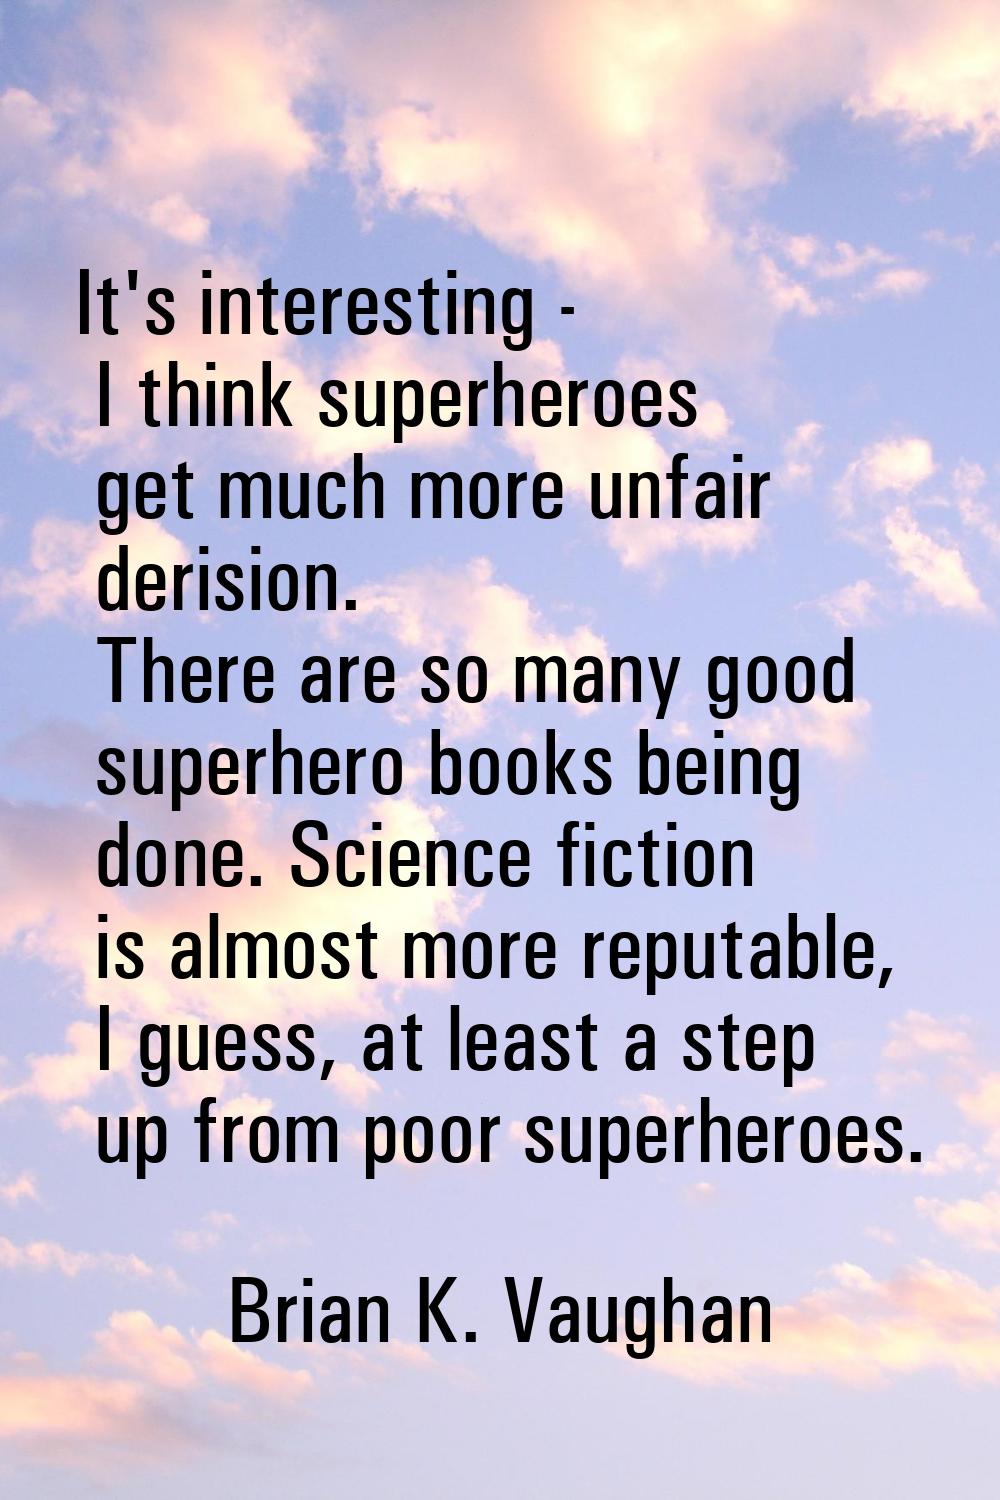 It's interesting - I think superheroes get much more unfair derision. There are so many good superh